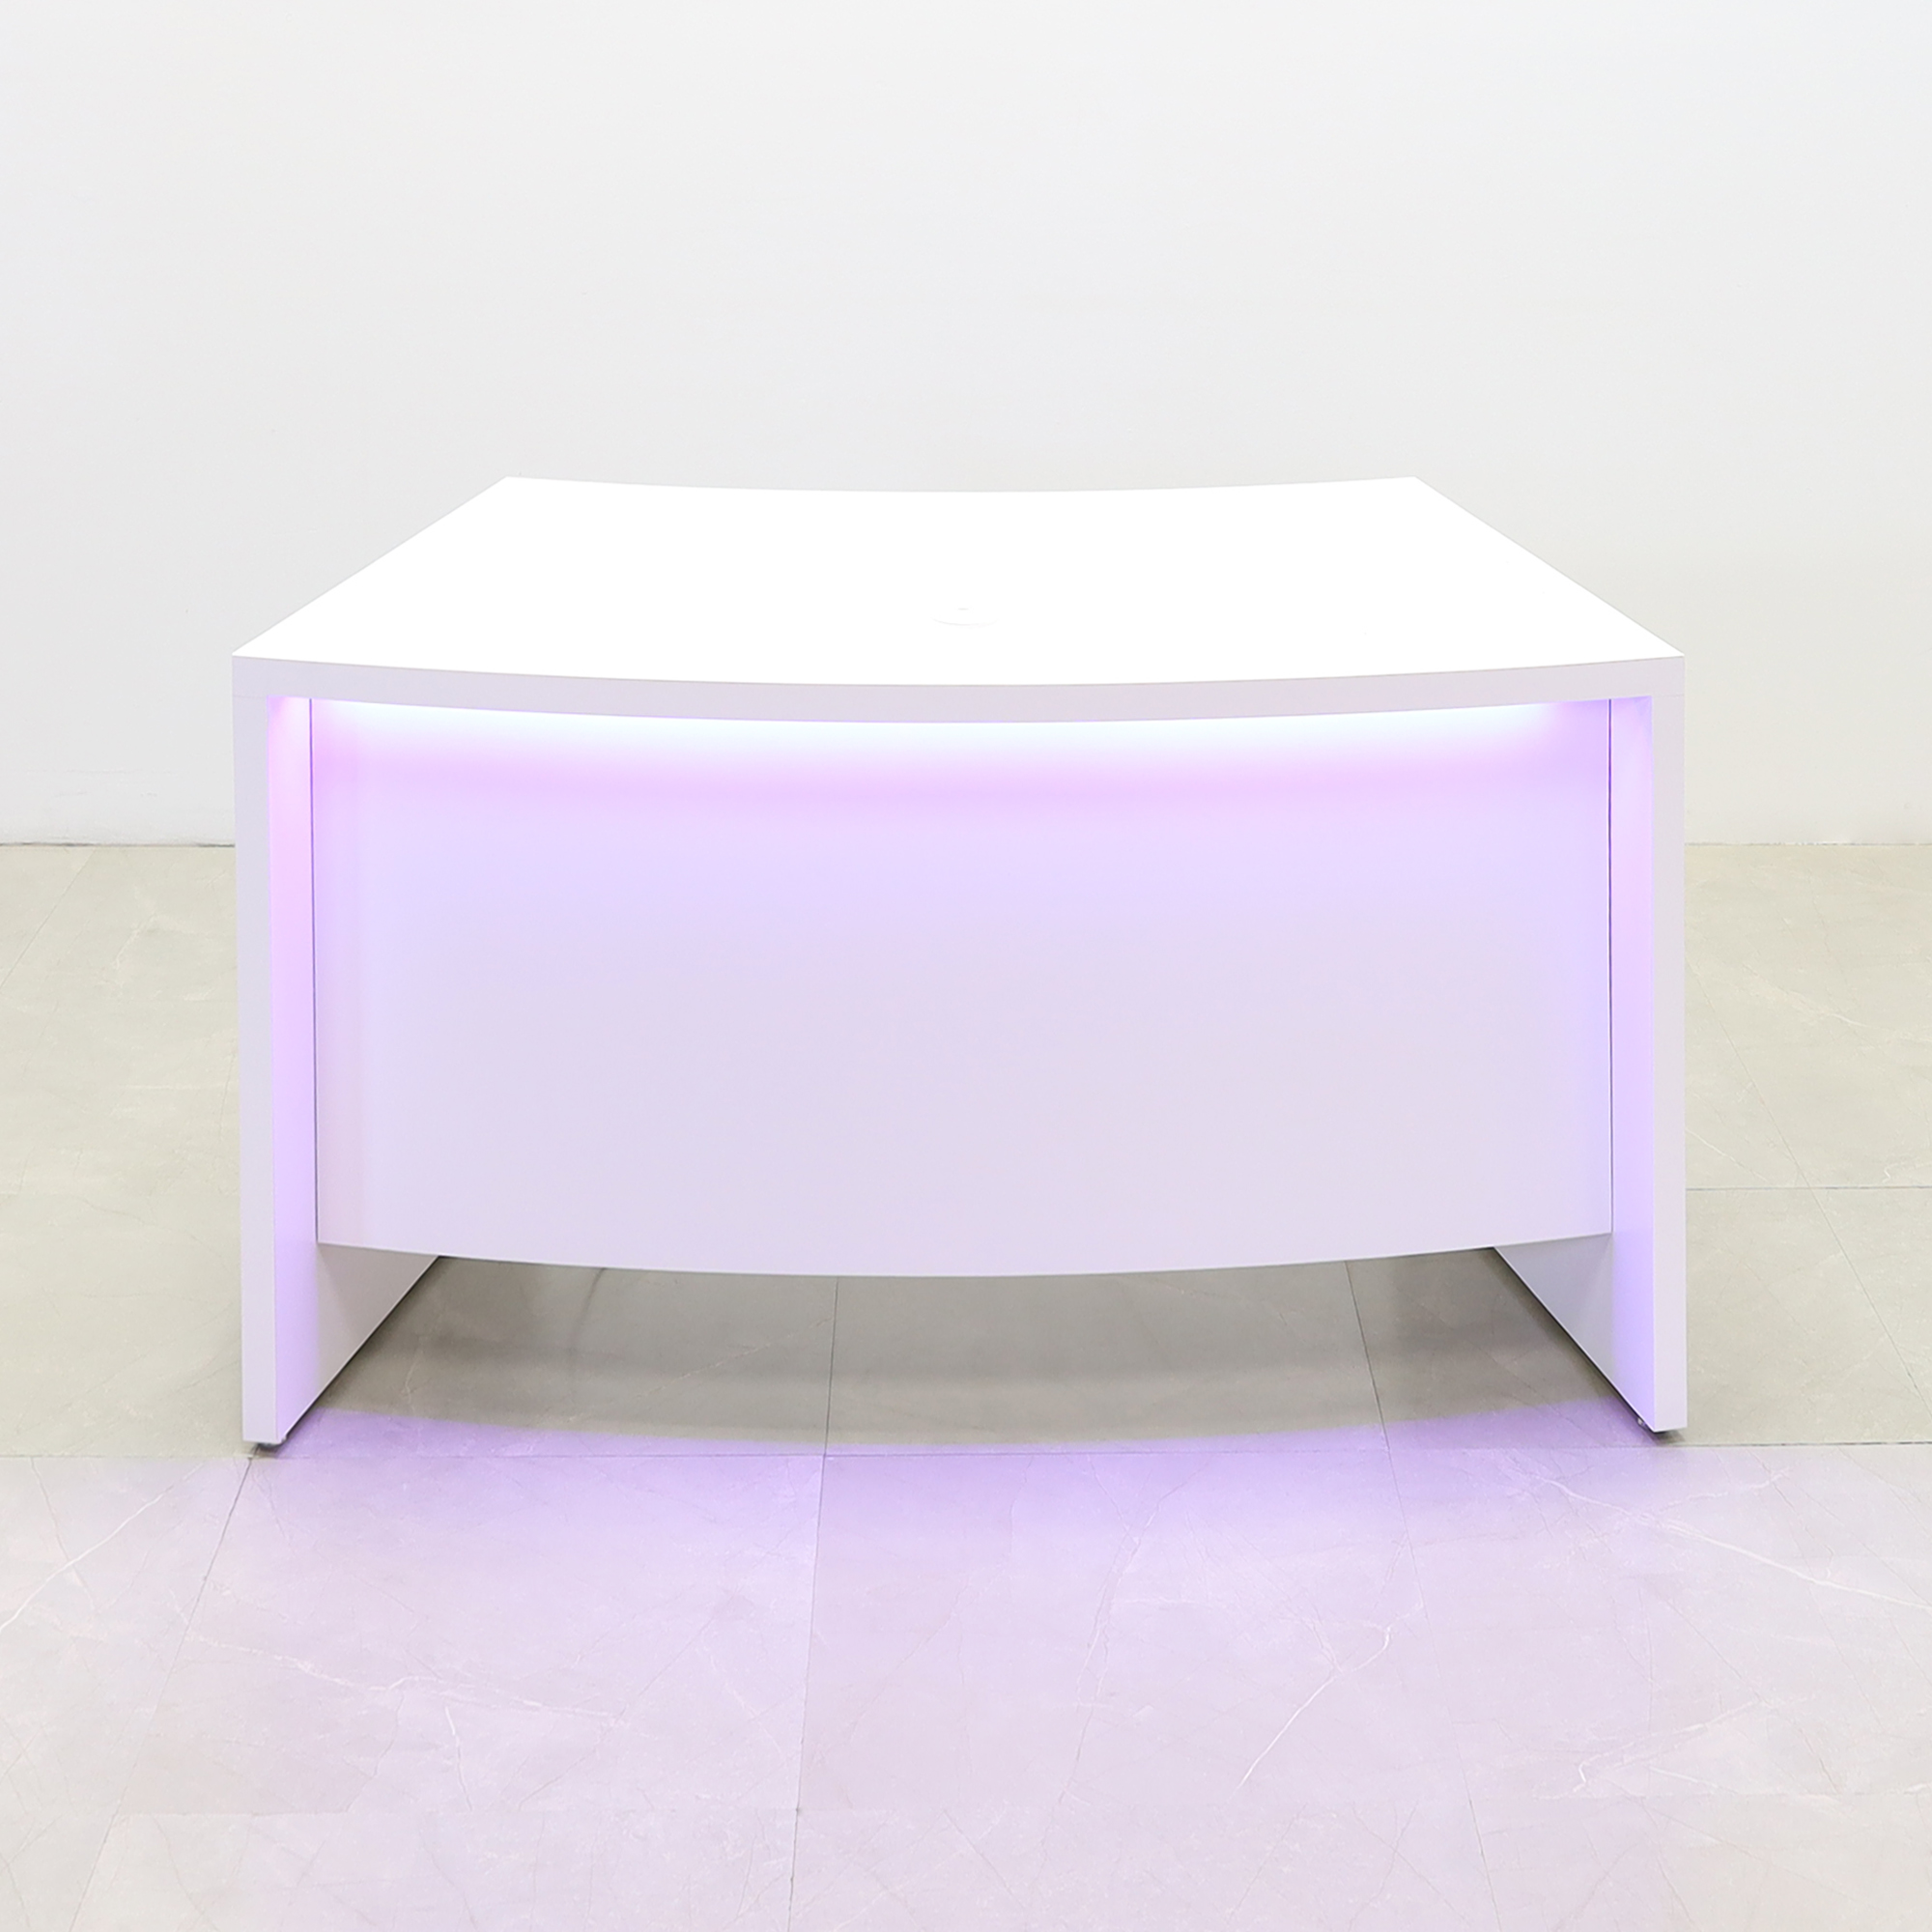 60-inch Seattle Curved Executive Desk in white matte laminate desk and front panel with colored-LED shown here.